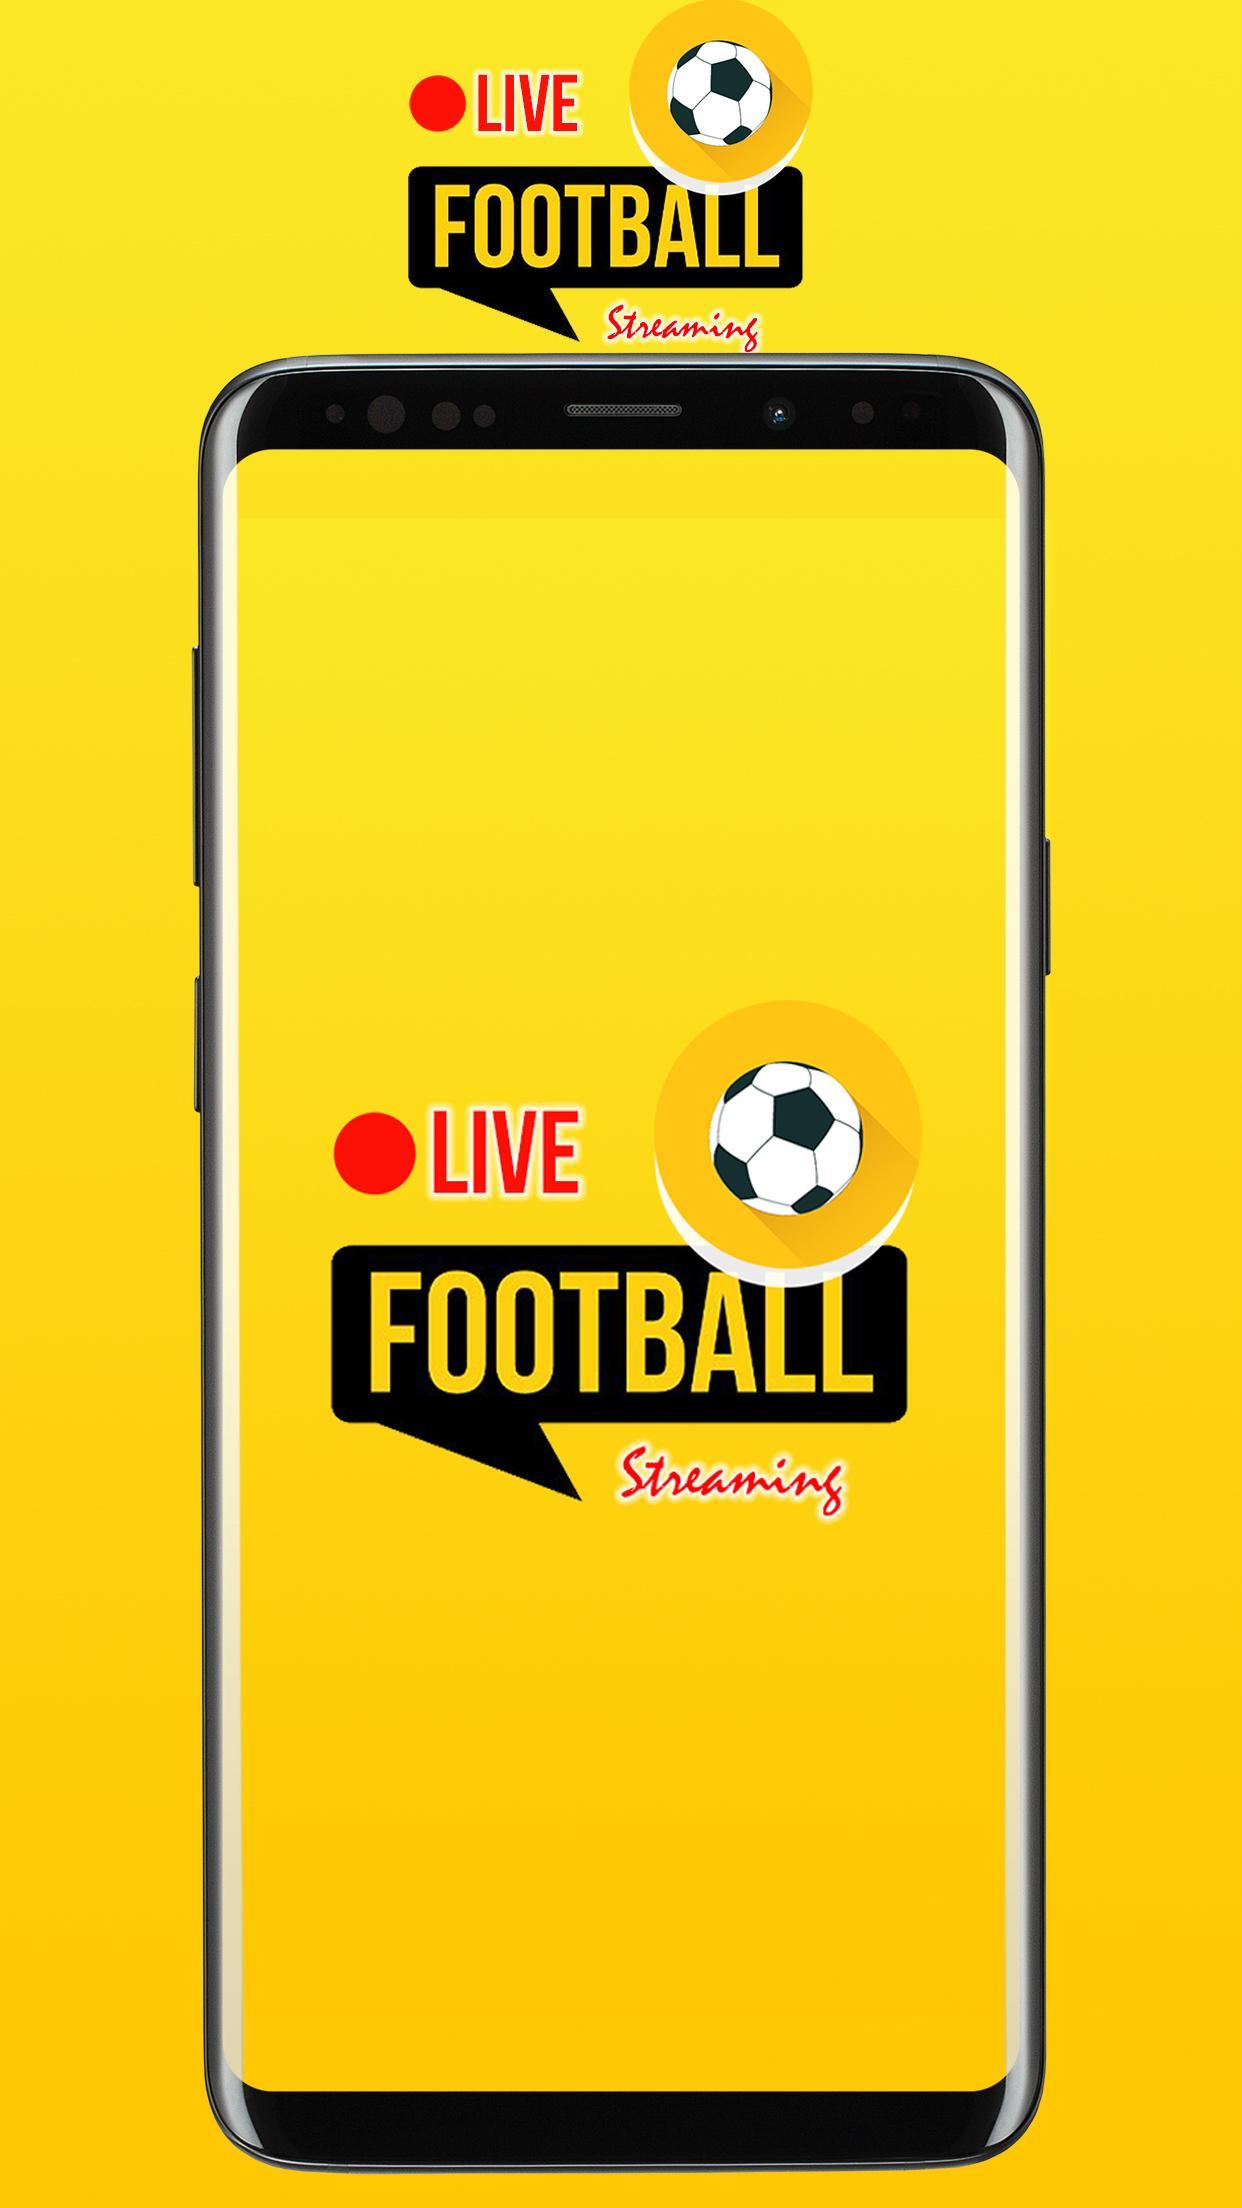 40 Top Images Football Live Streaming Apk : Download Football TV - Live Streaming HD Channels guide on ...